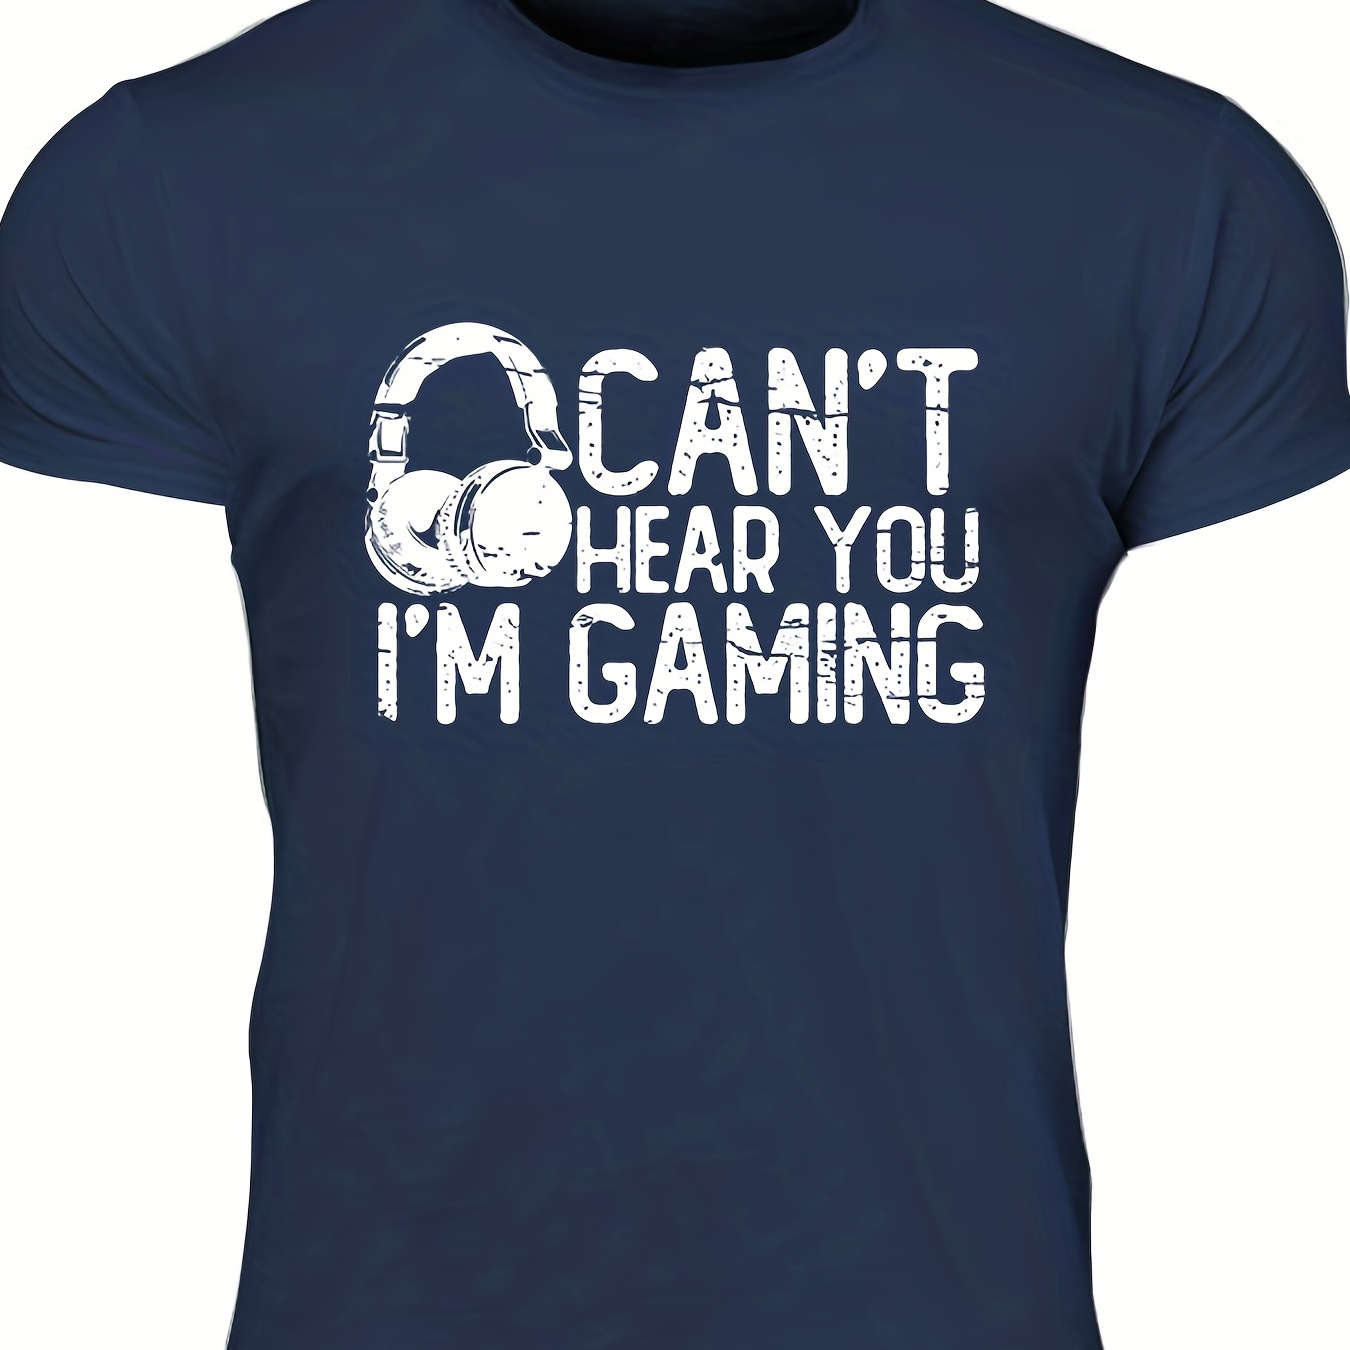 

can't Hear You I'm Gaming" Pattern Print Men's Comfy T-shirt, Graphic Tee Men's Summer Outdoor Clothes, Men's Clothing, Tops For Men, Gift For Men